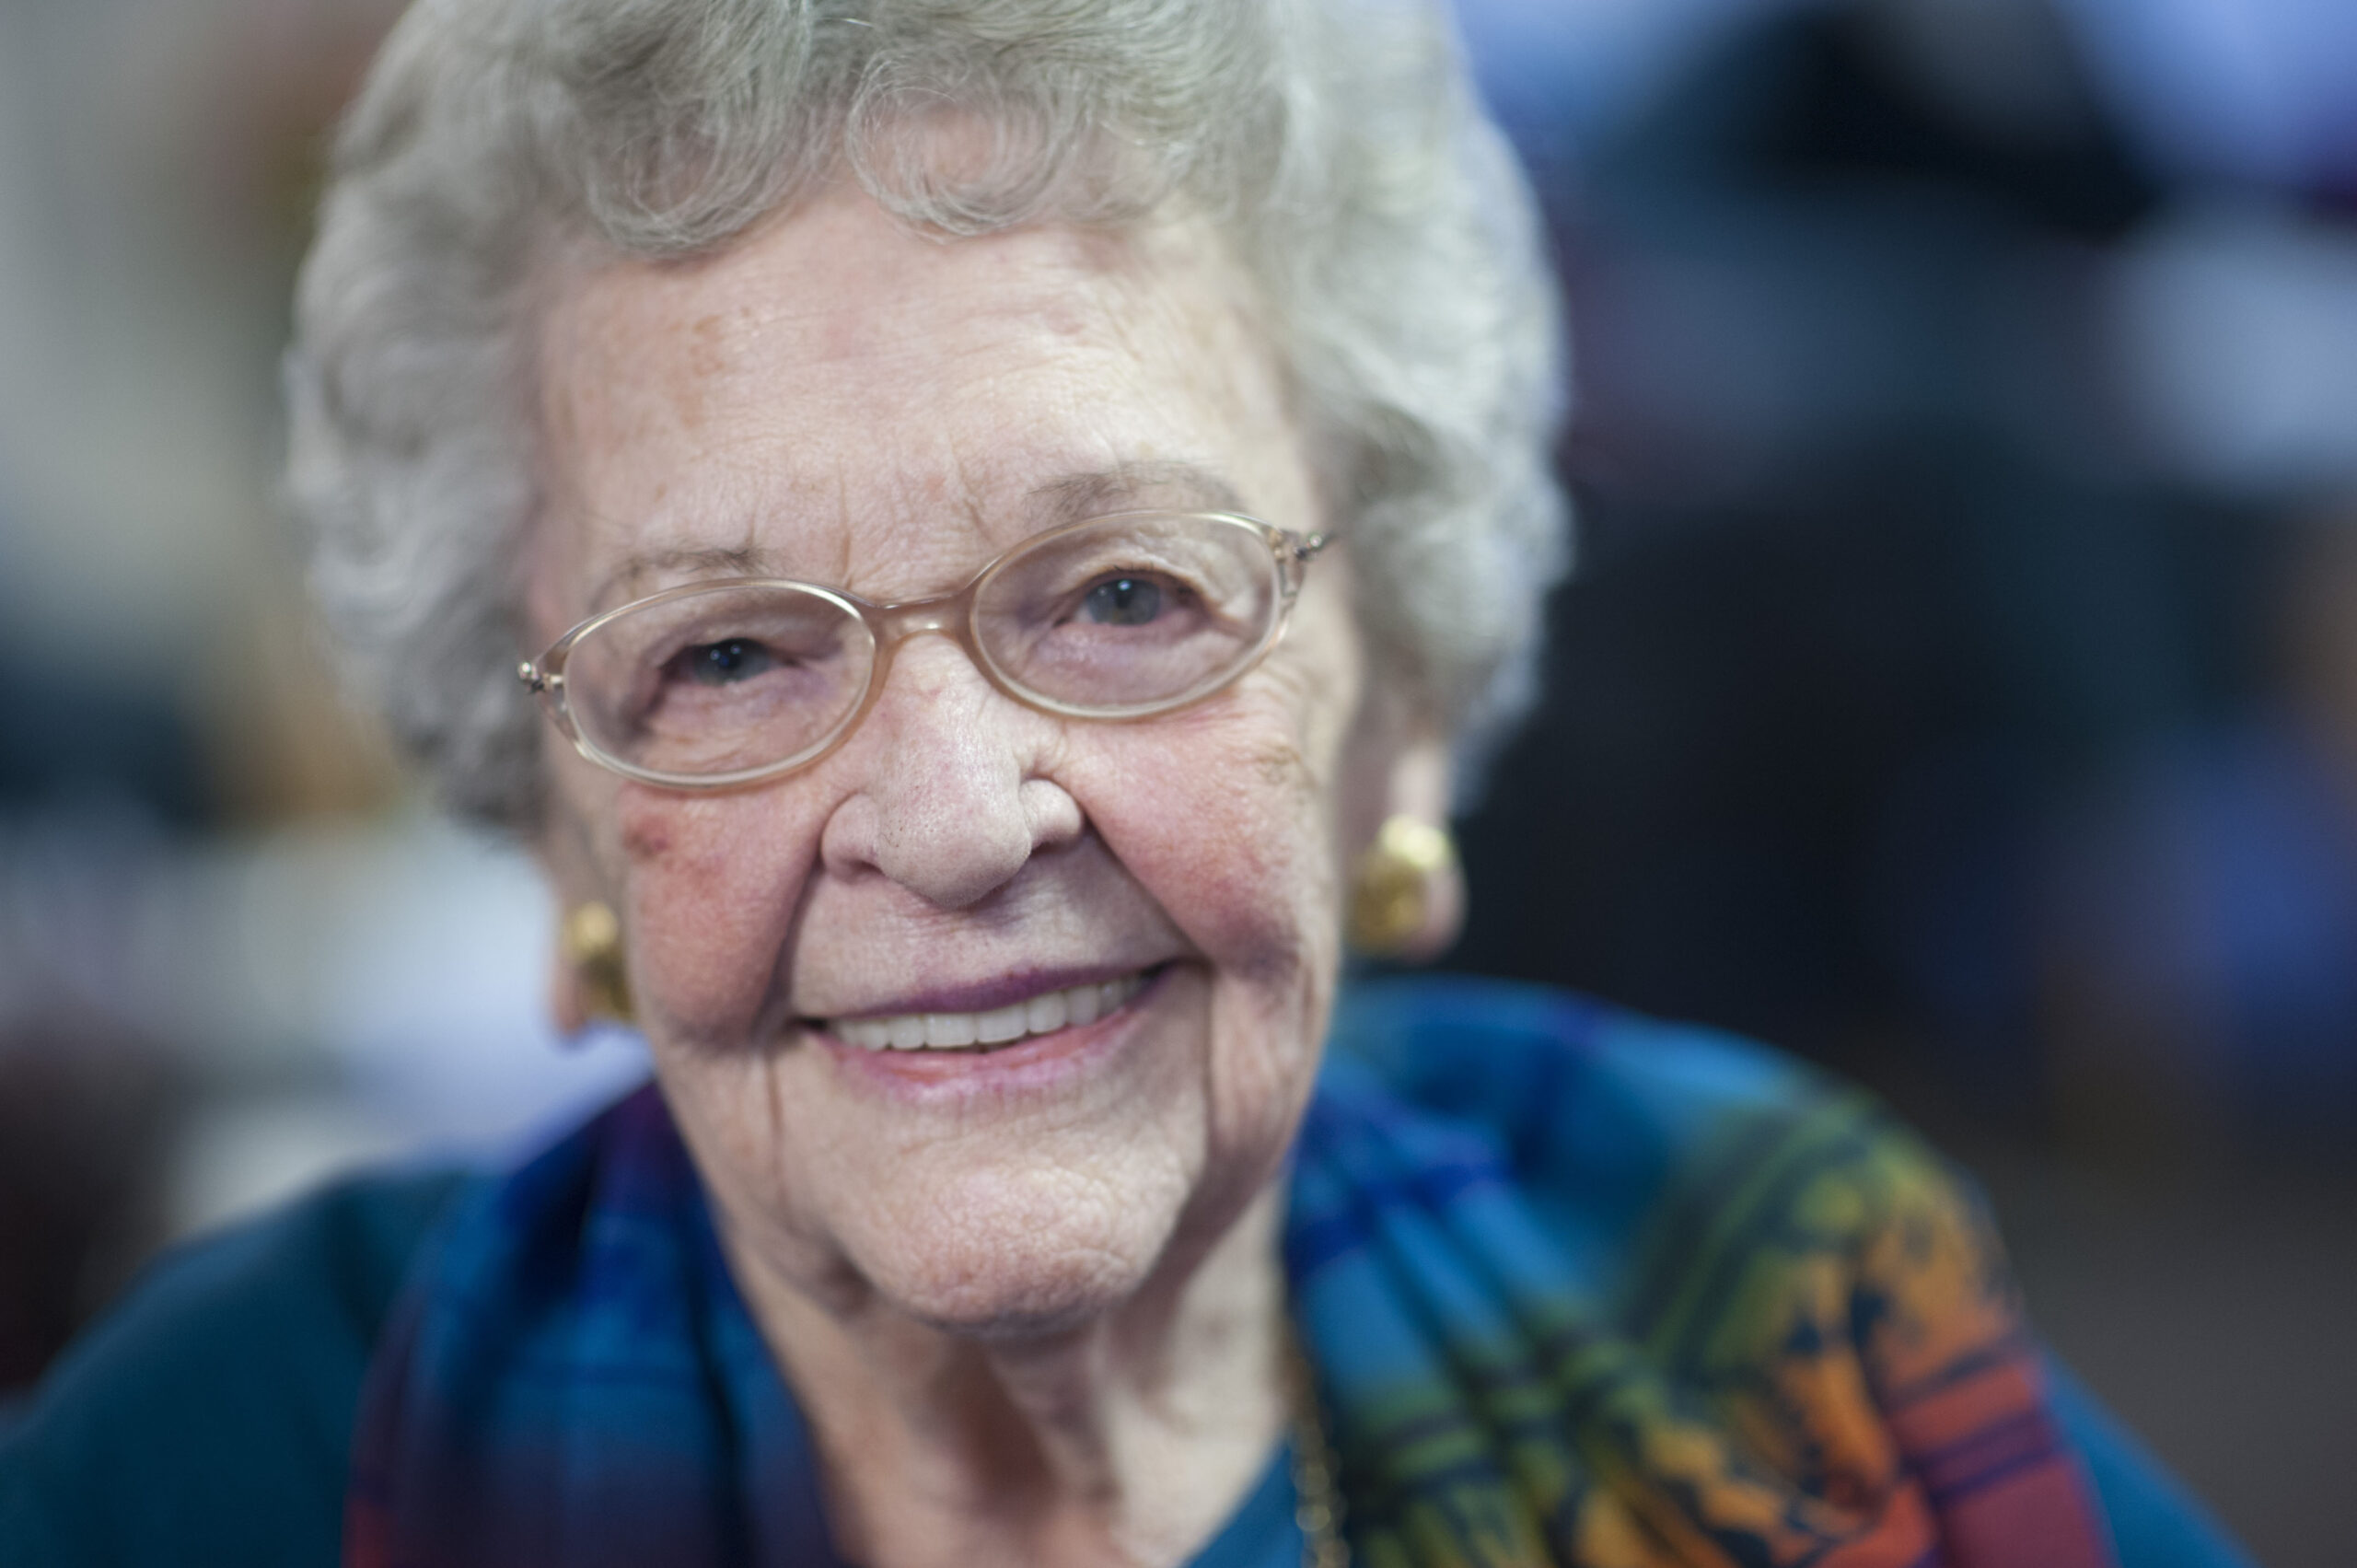 Elderly woman smiles at the camera